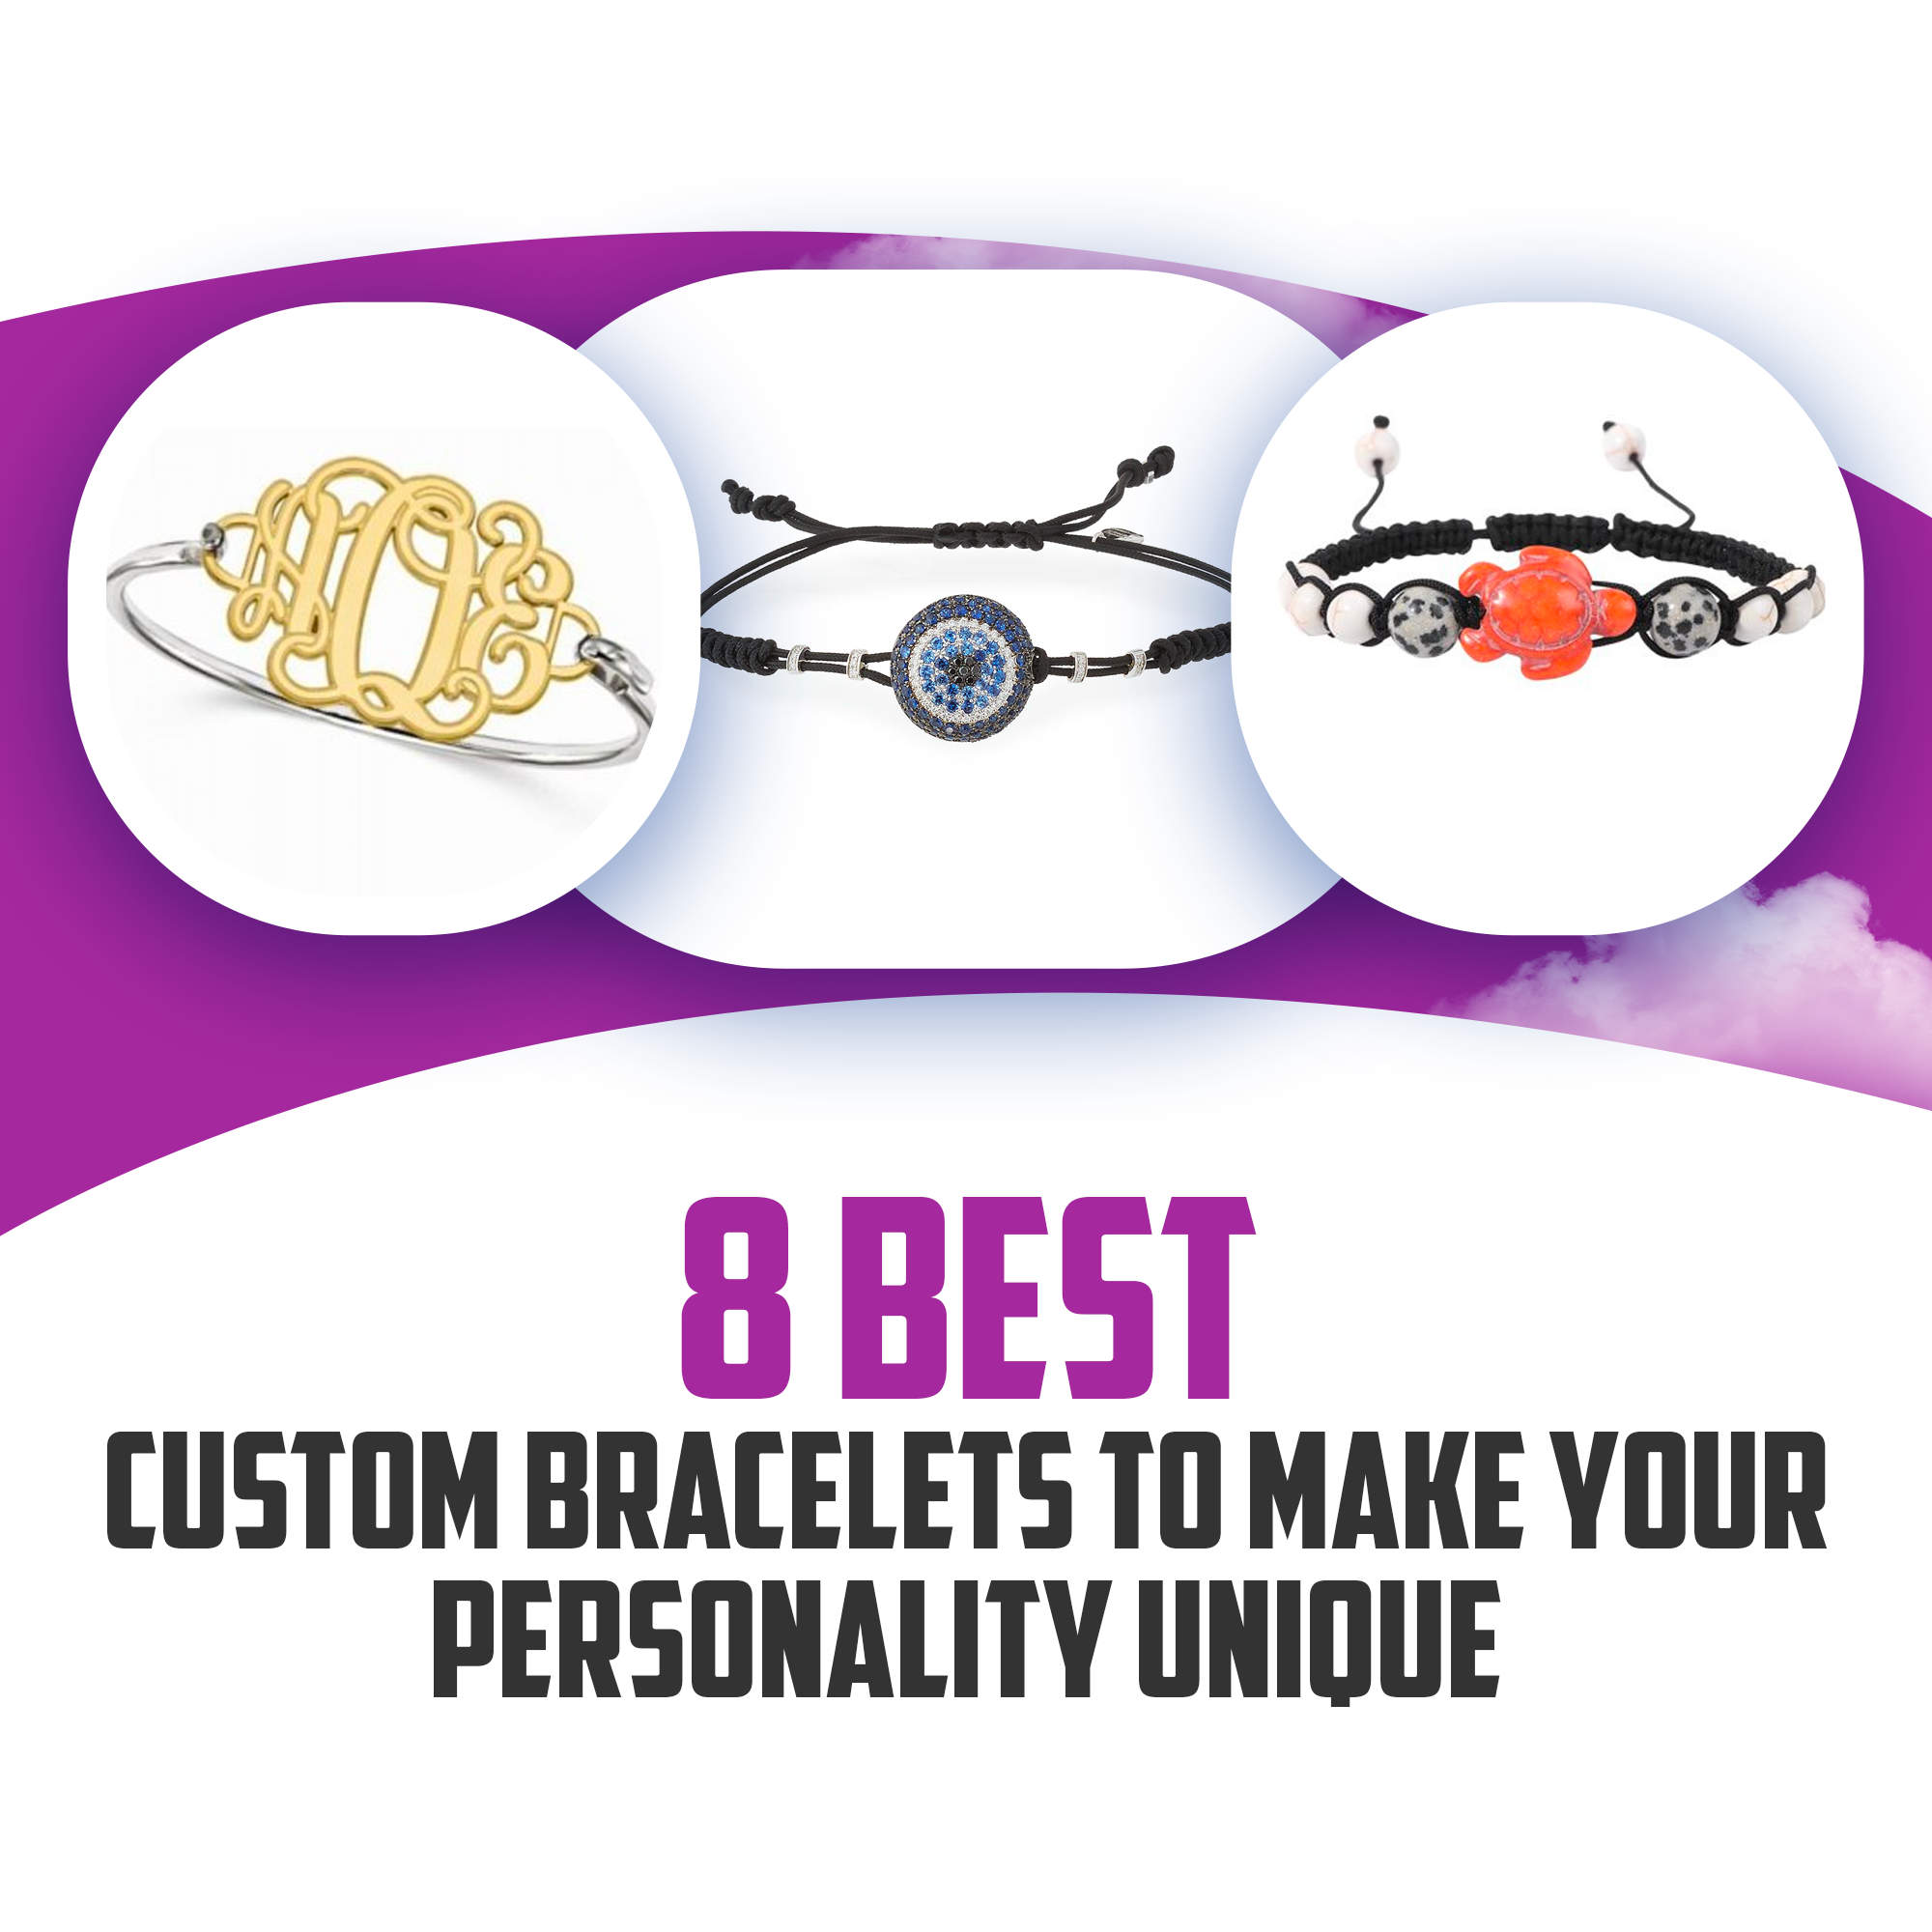 8 Best Custom Bracelets to Make Your Personality Unique